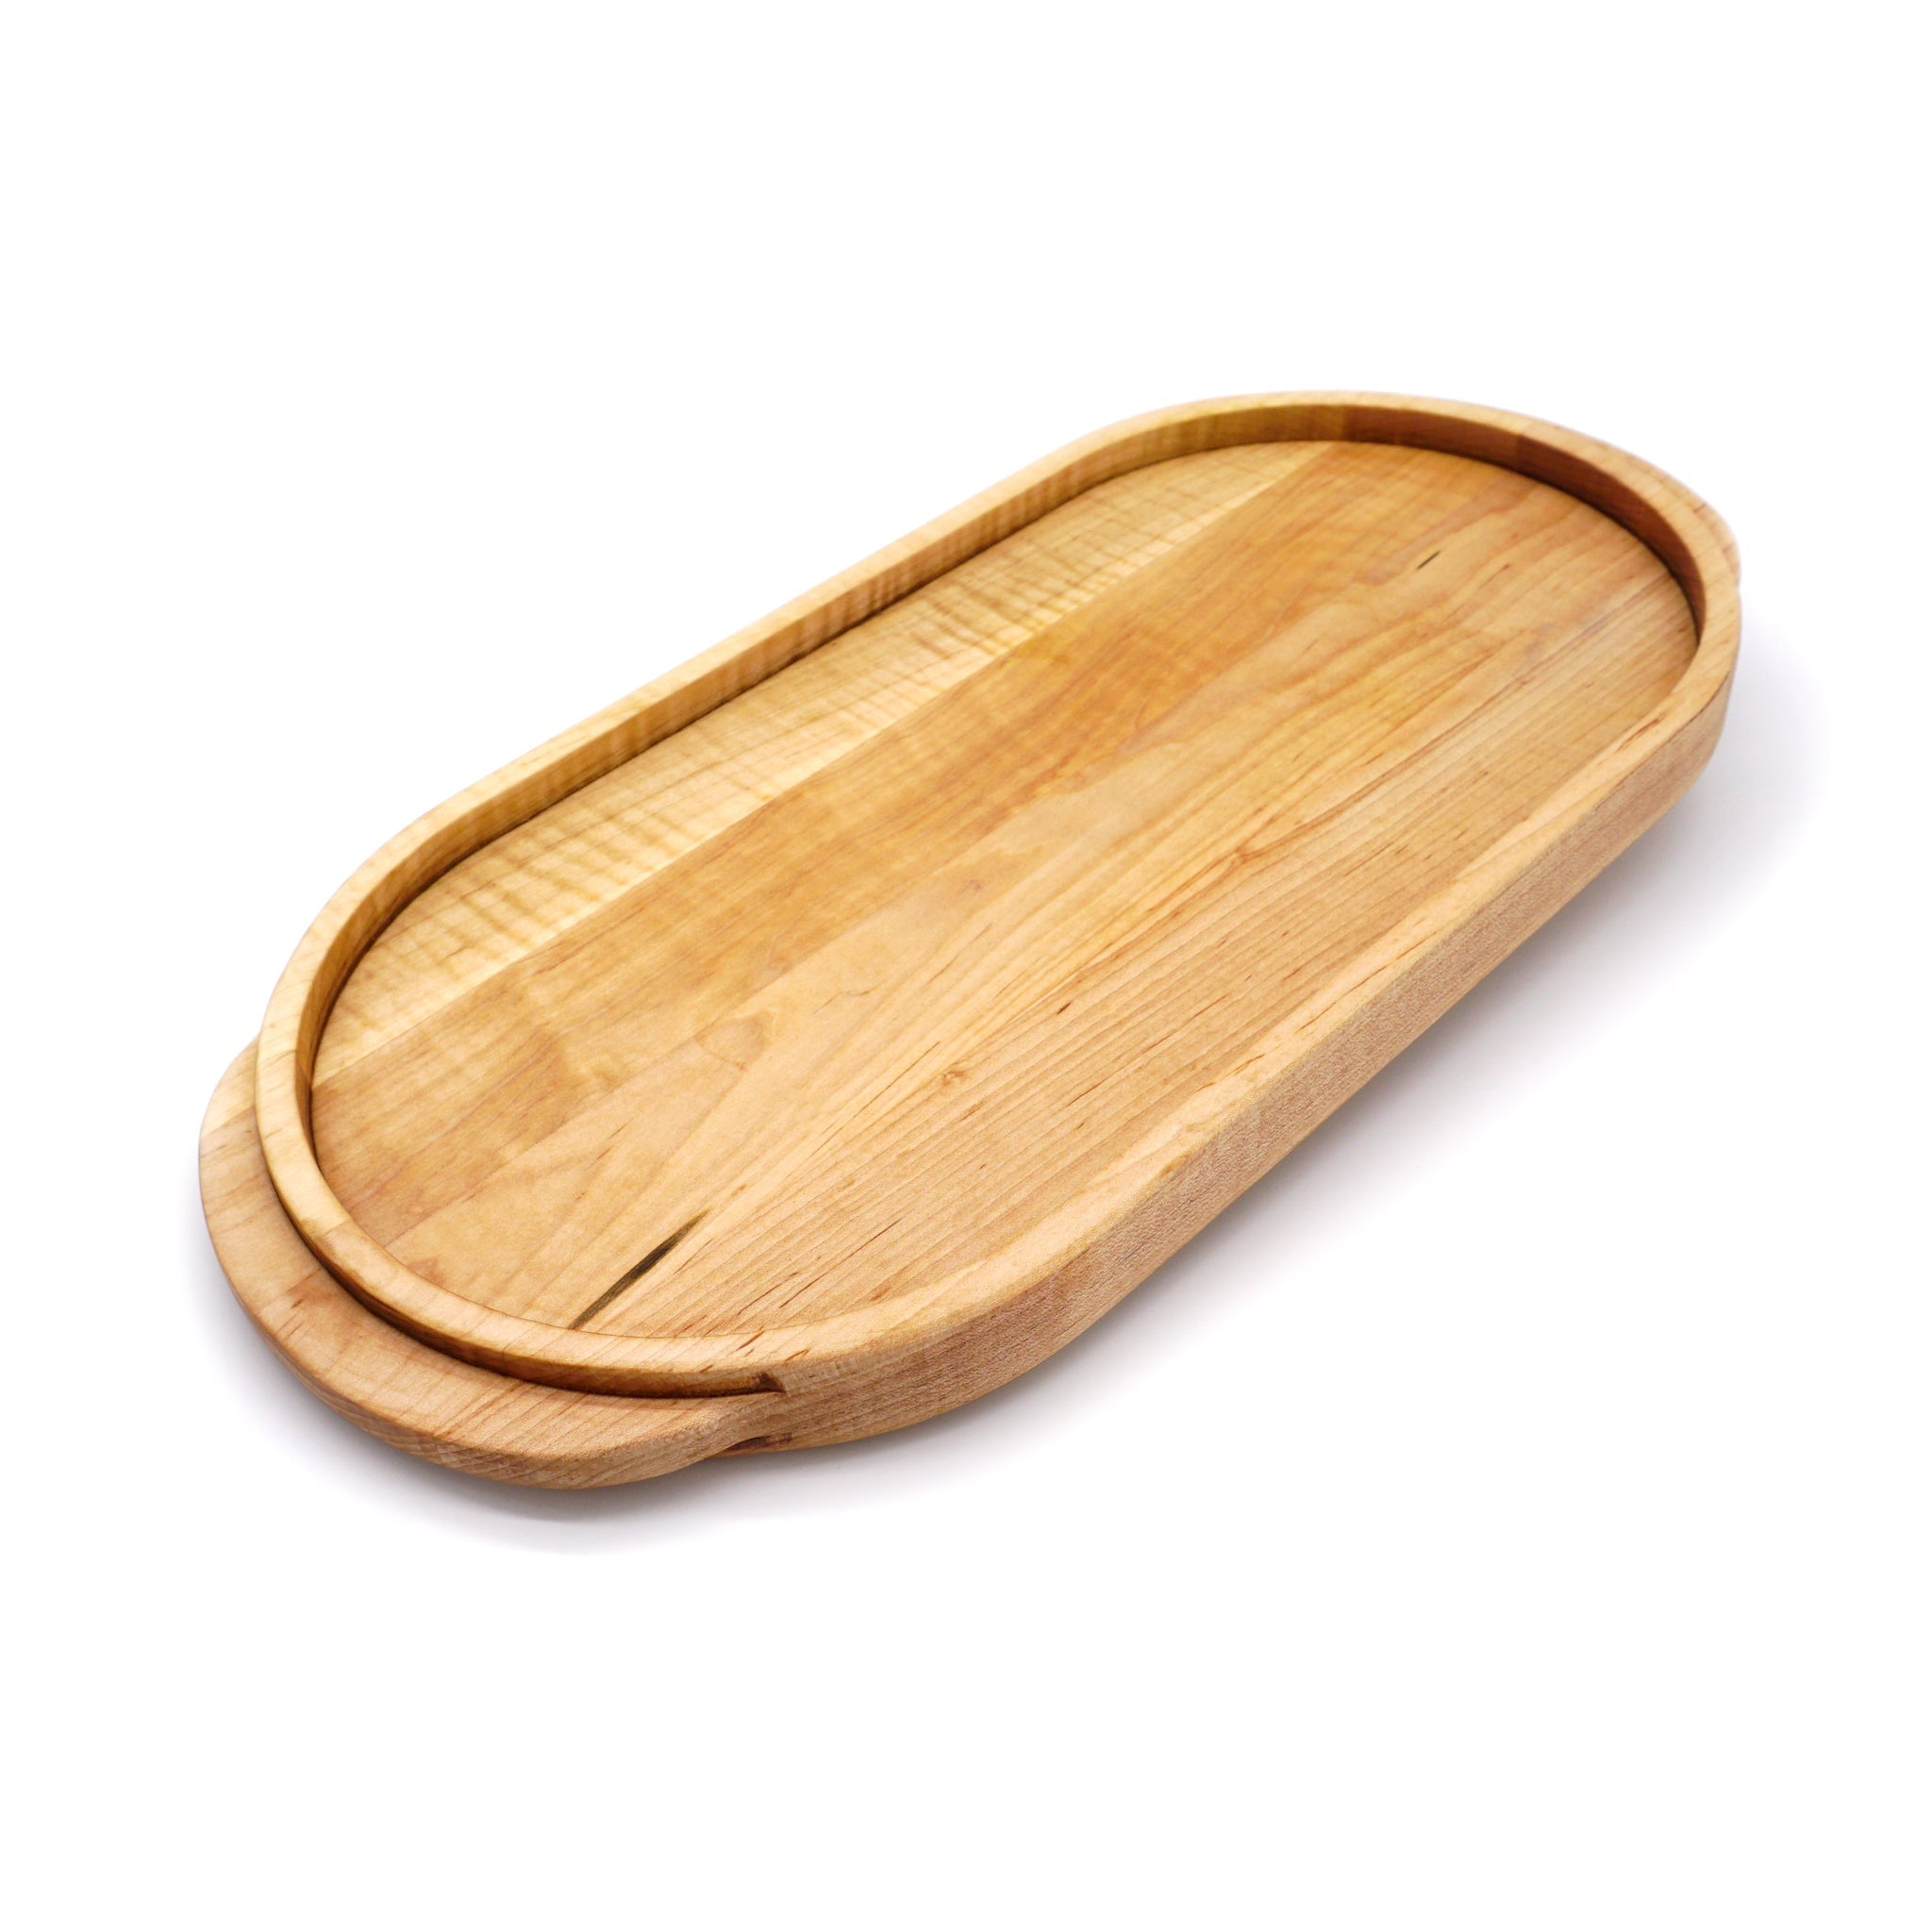 A JK Adams Maple Oval Wooden Serving Tray with food on it.